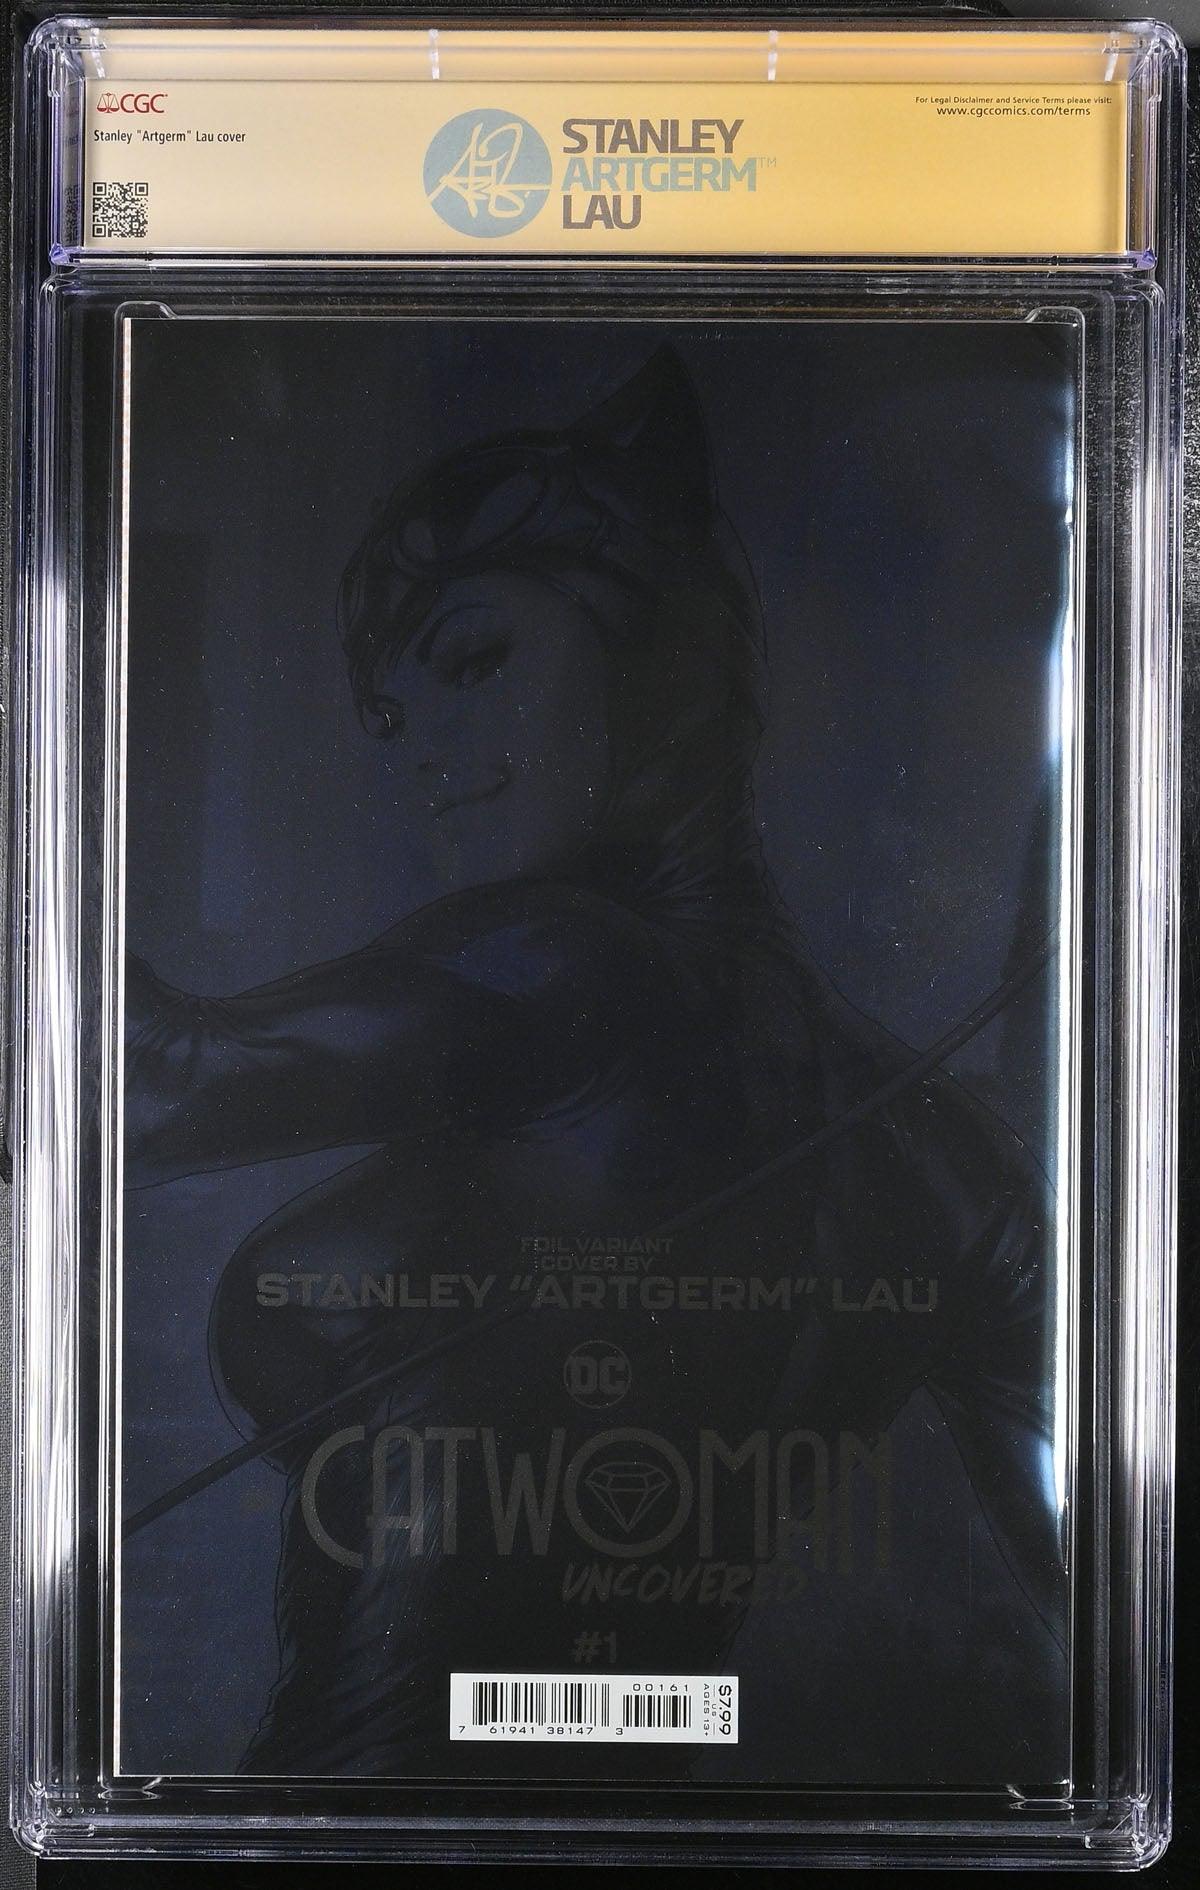 CGC CATWOMAN UNCOVERED #1 LAU FOIL EDITION (9.8) SIGNATURE SERIES - SIGNED BY STANLEY "ARTGERM"